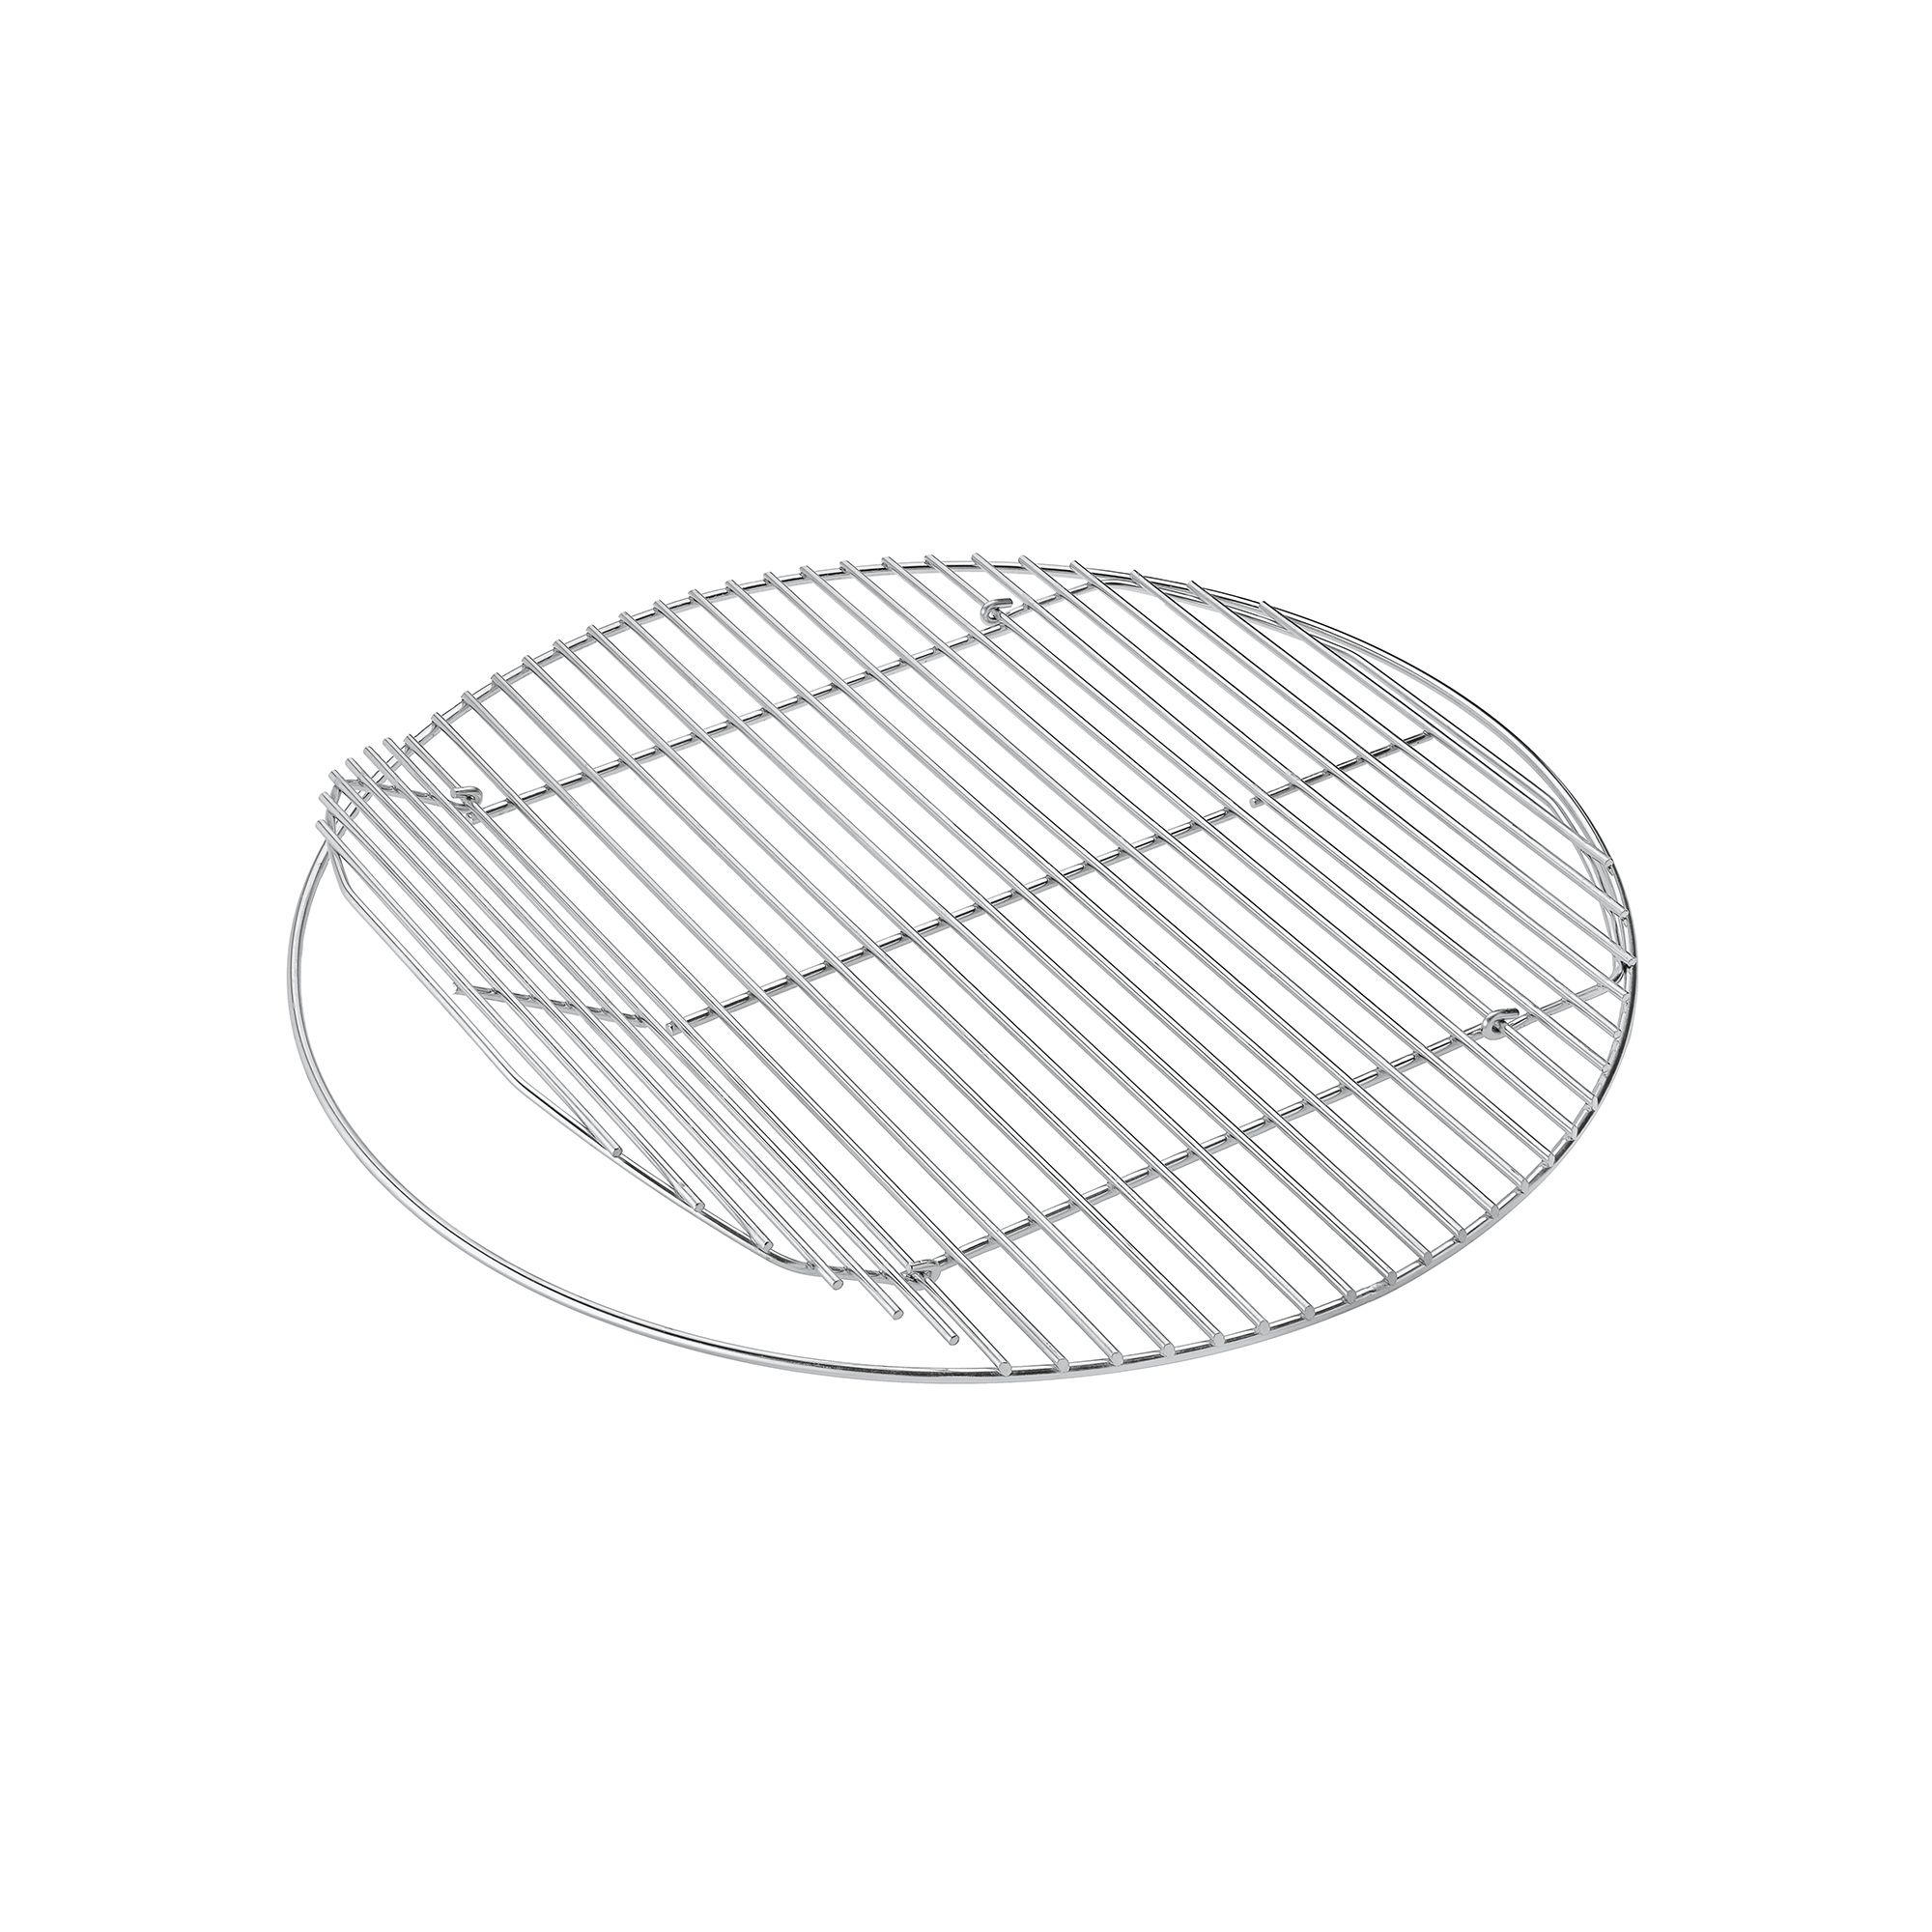 Grilling Grate Belly/Sport/Smoker F50 stainless steel 20 in.